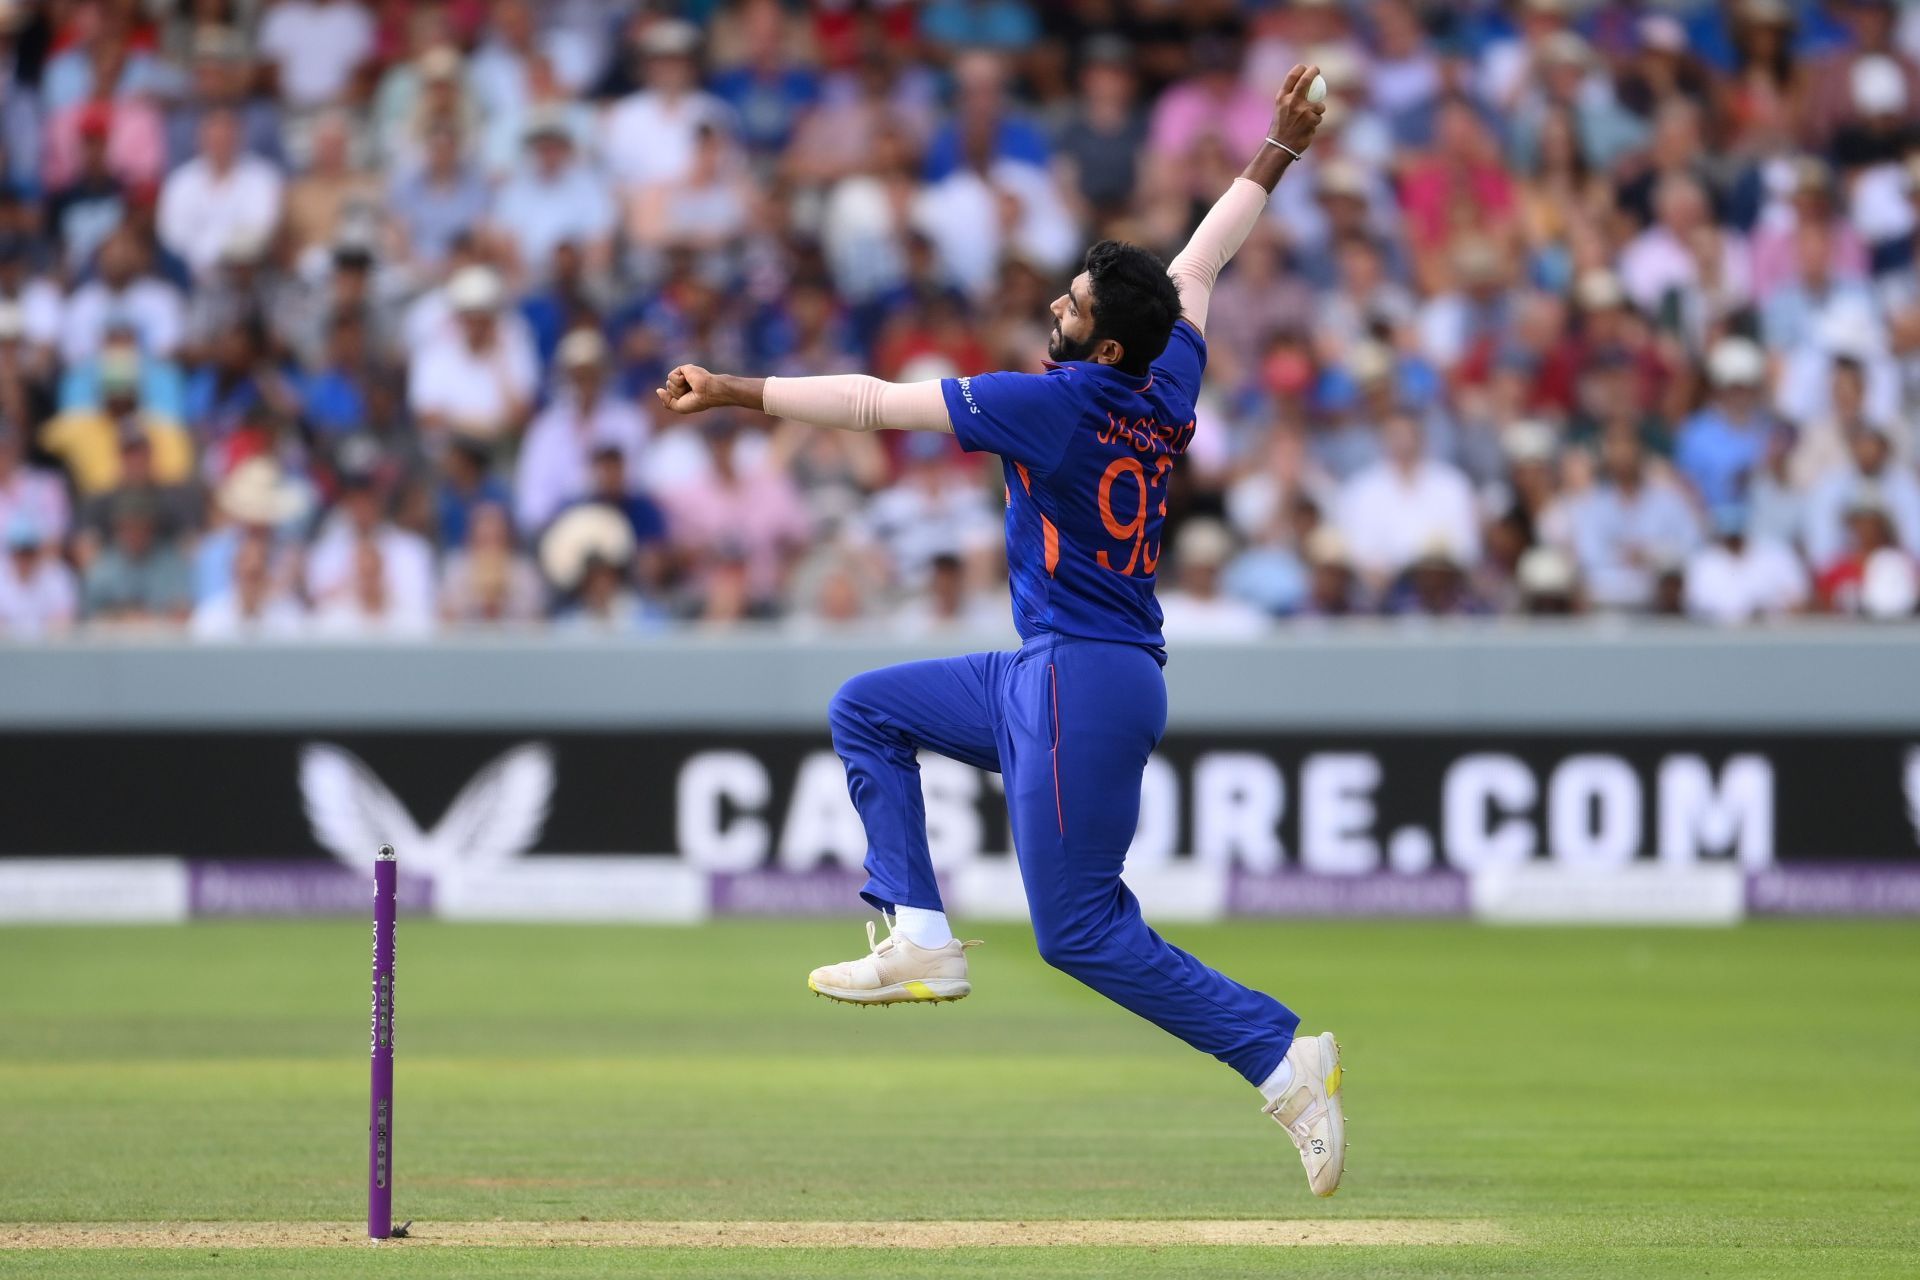 Jasprit Bumrah is the leader of the Indian bowling attack.